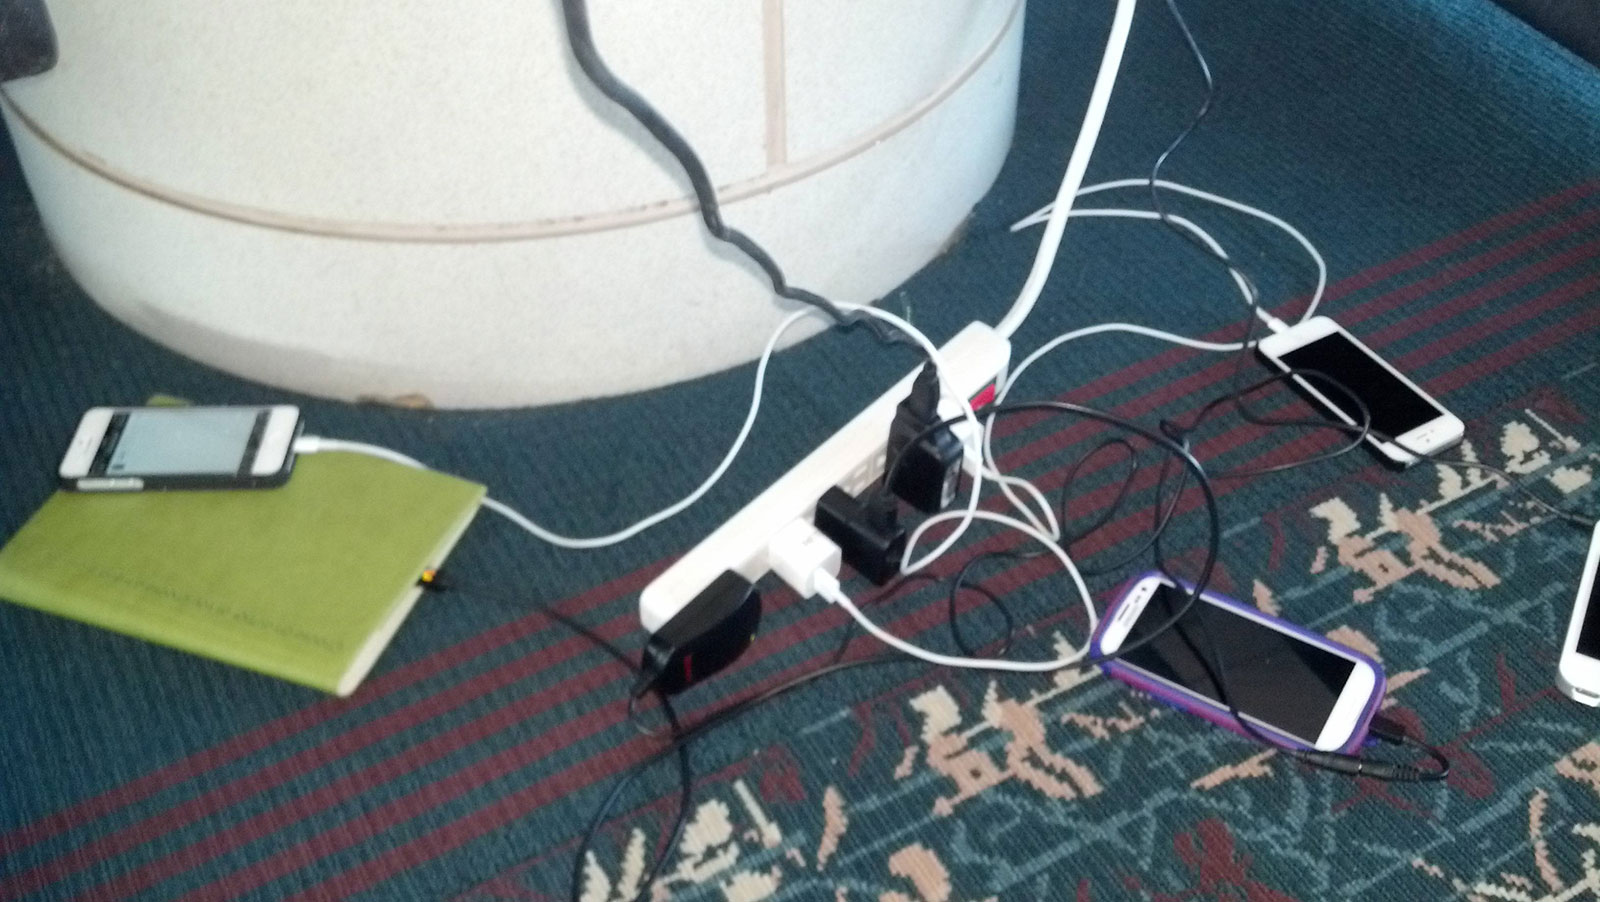 For bonus points, travel with a power strip and be the airport hero.